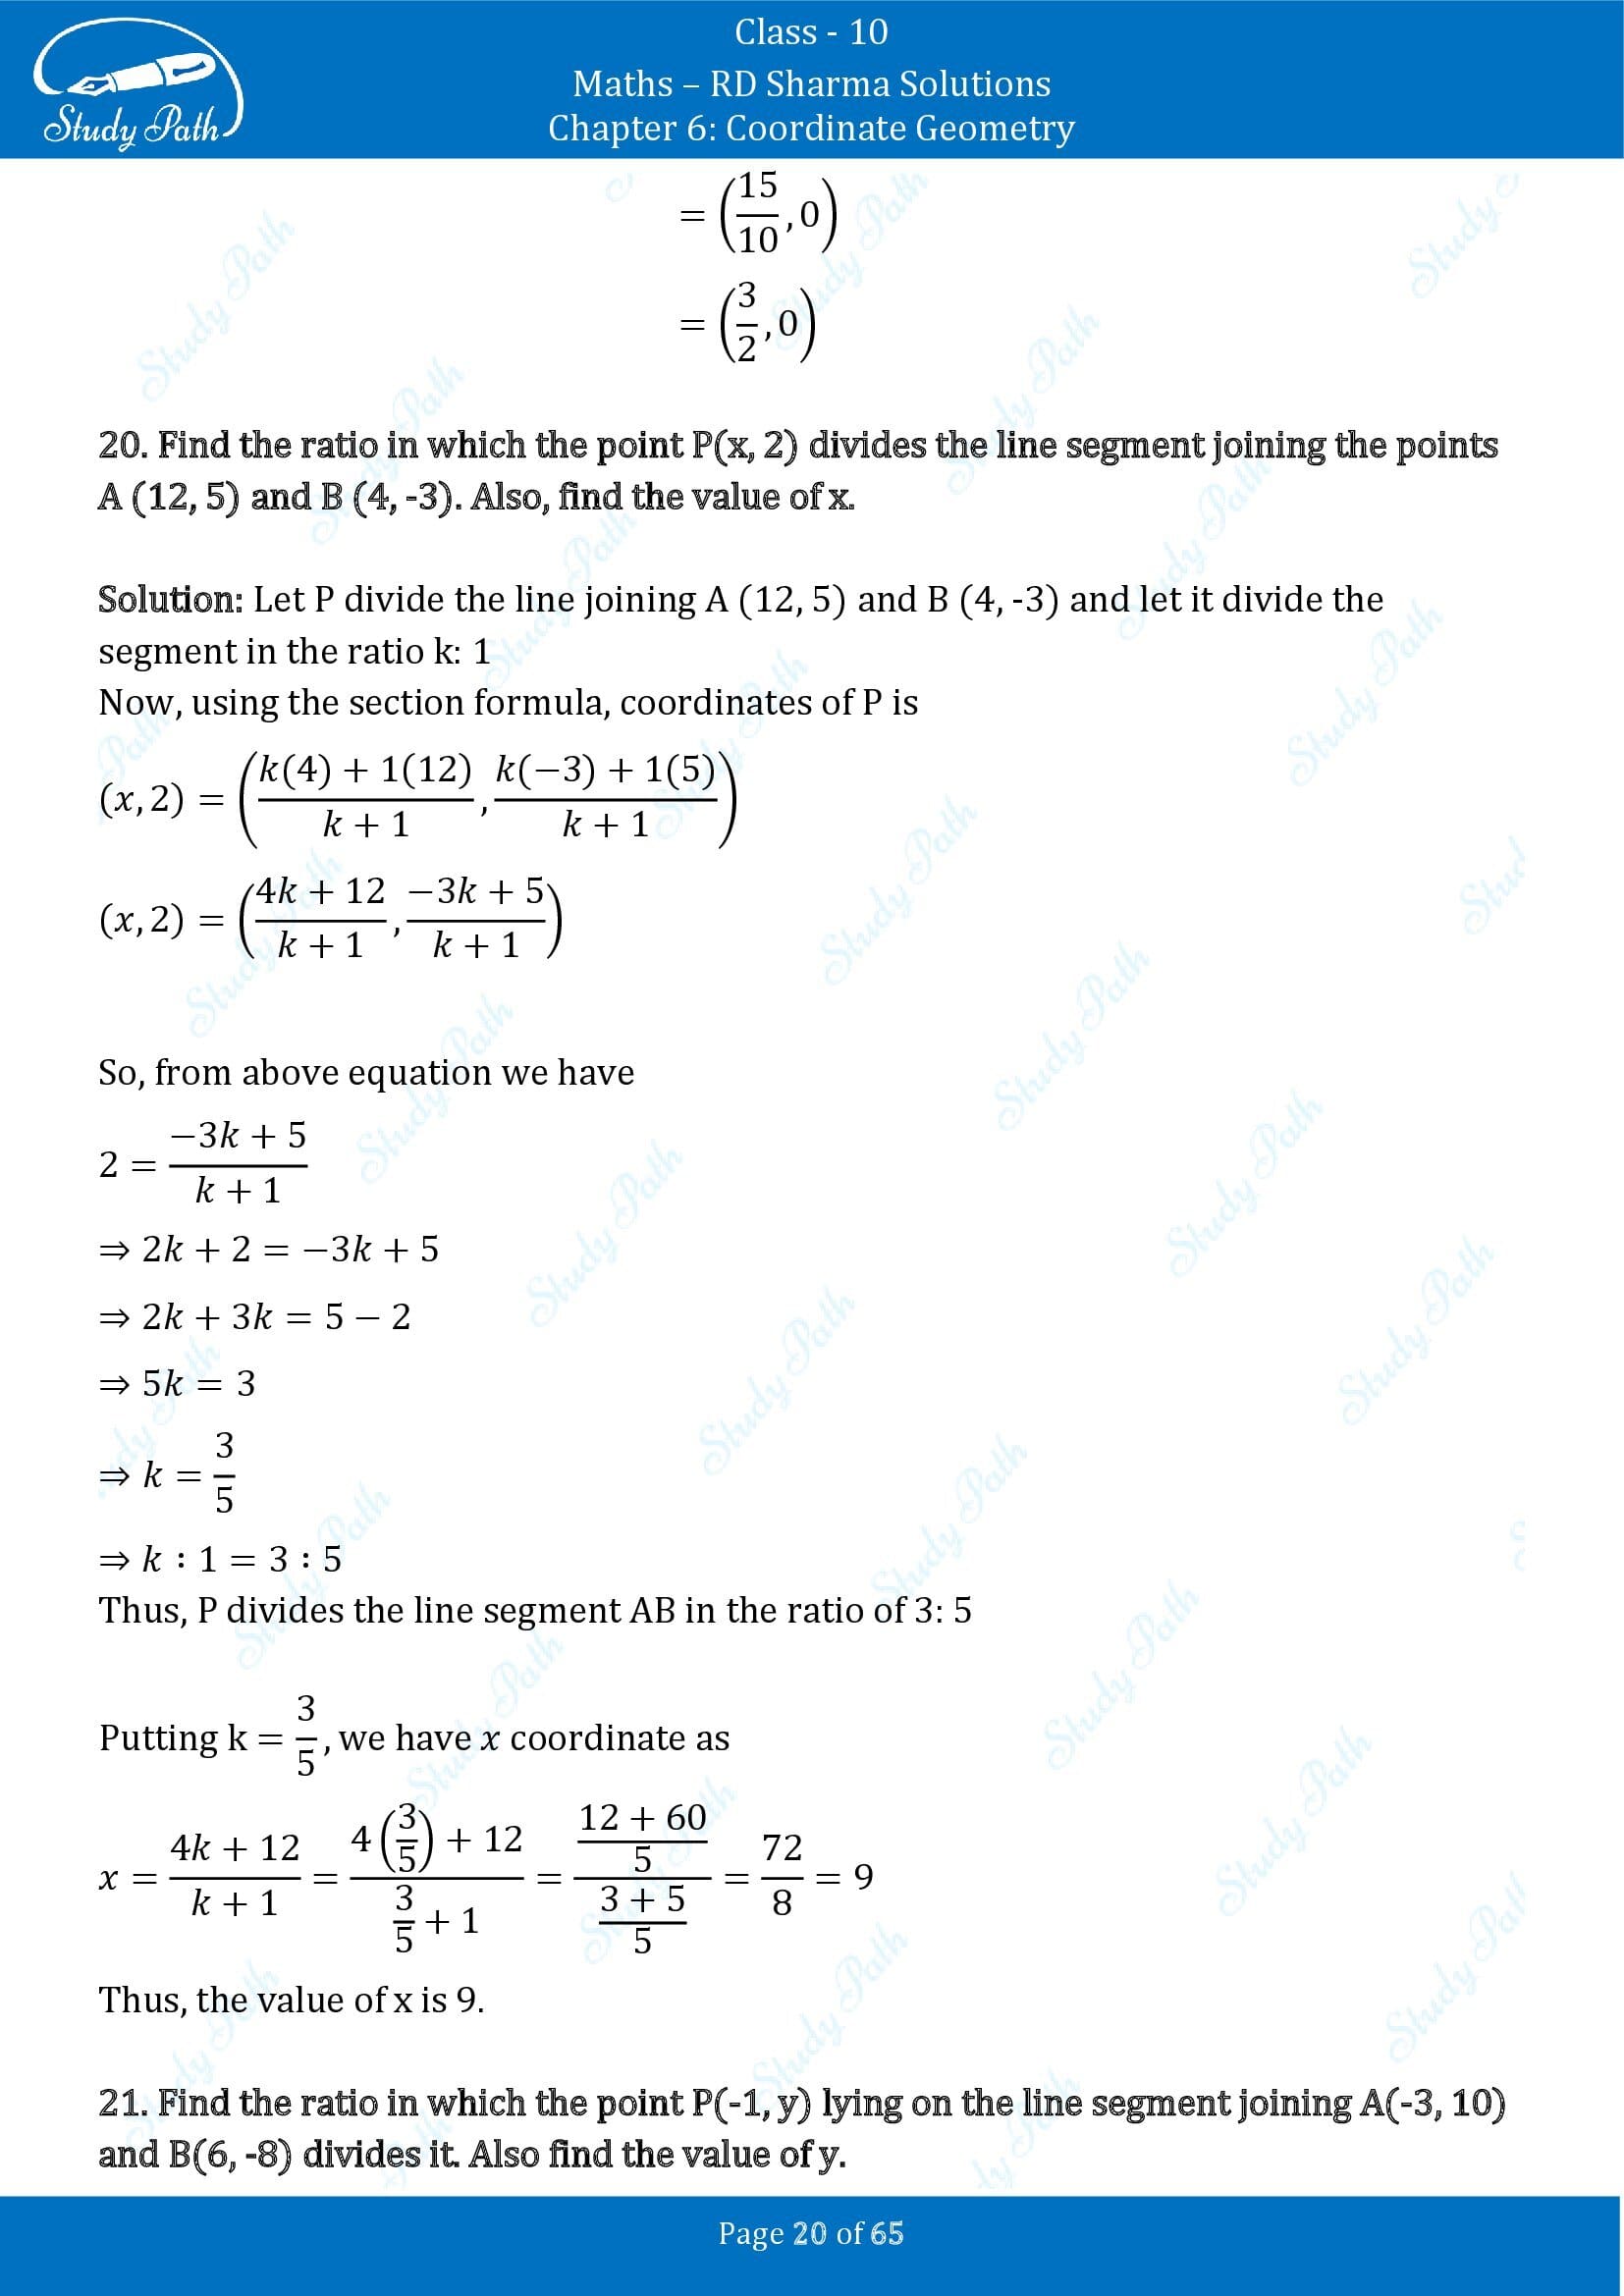 RD Sharma Solutions Class 10 Chapter 6 Coordinate Geometry Exercise 6.3 00020